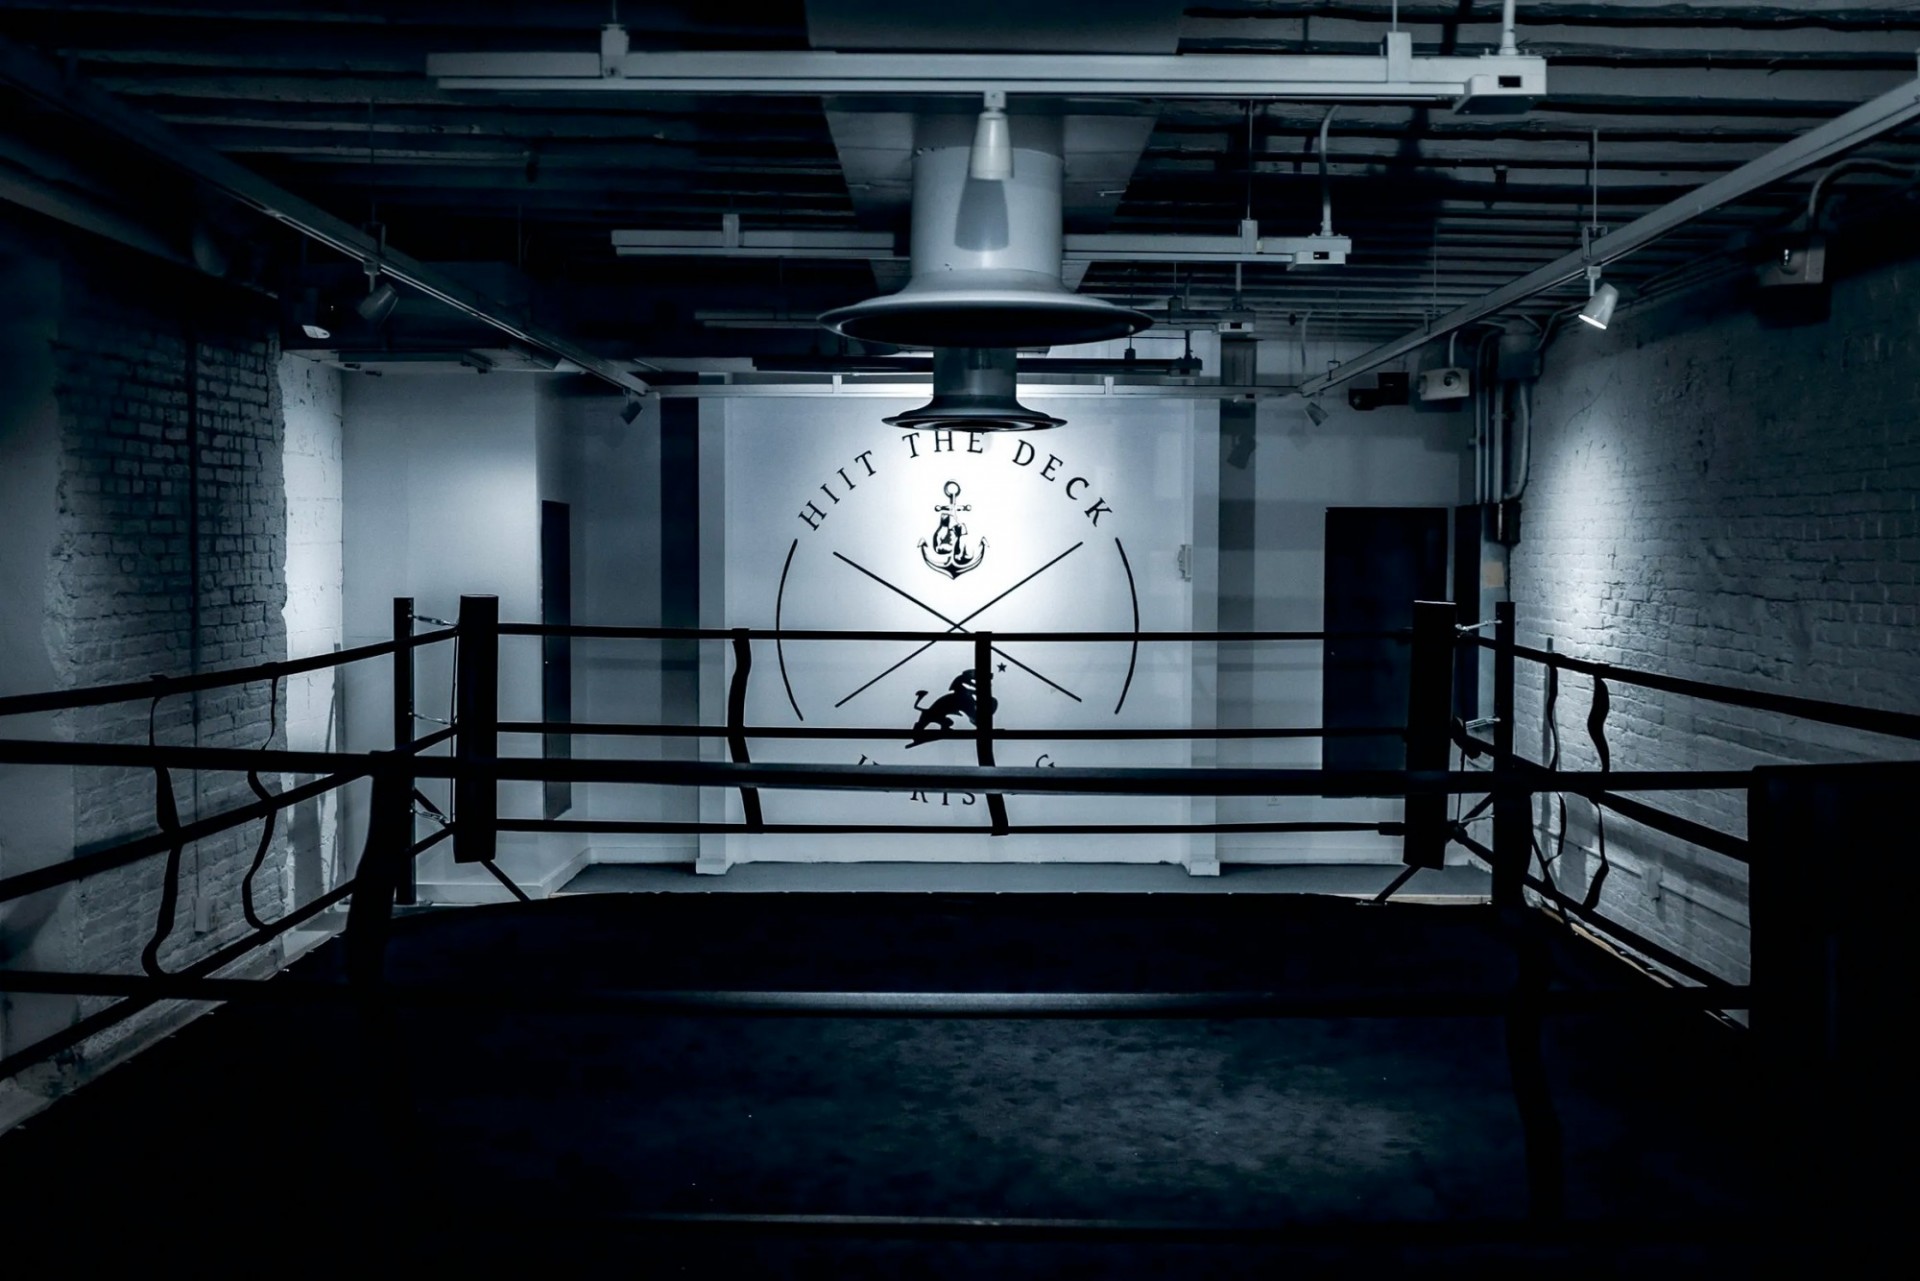 The interior of a boxing gym that is very dim, with a HIIT the Deck logo on the wall.